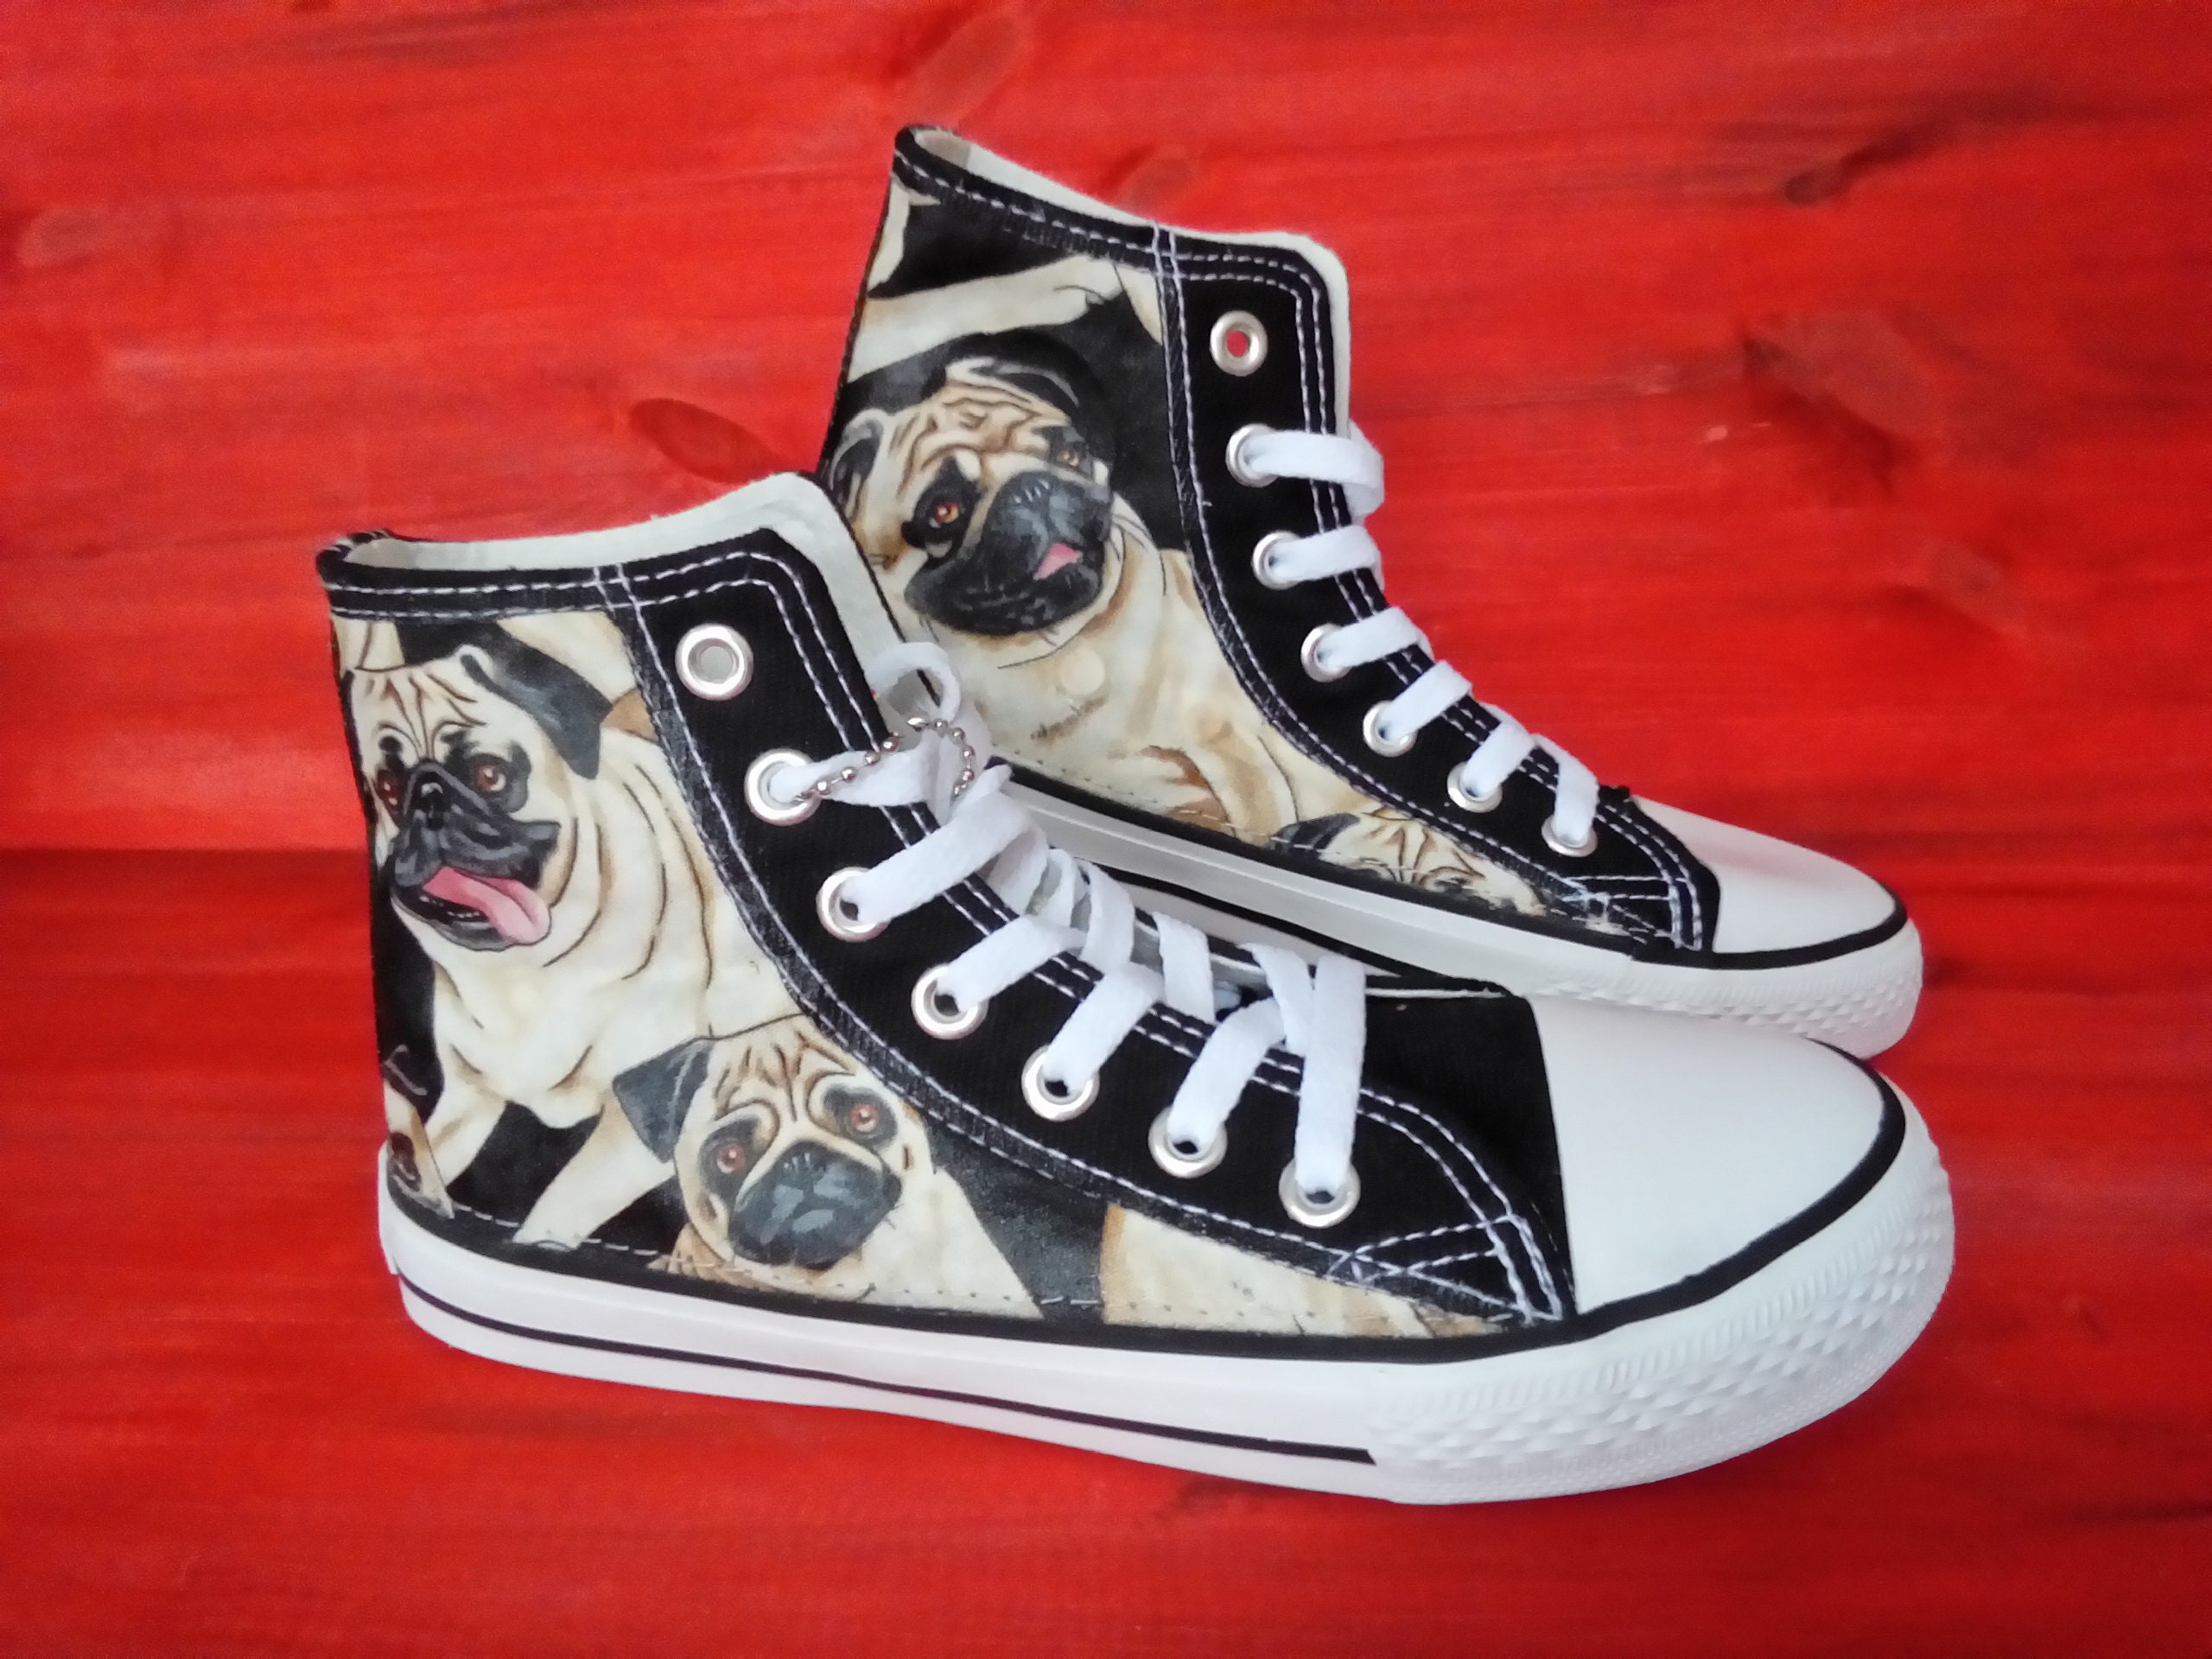 Classic Sneakers Unisex Adults Low-Top Trainers Skate Shoes Anatomy of A Pug